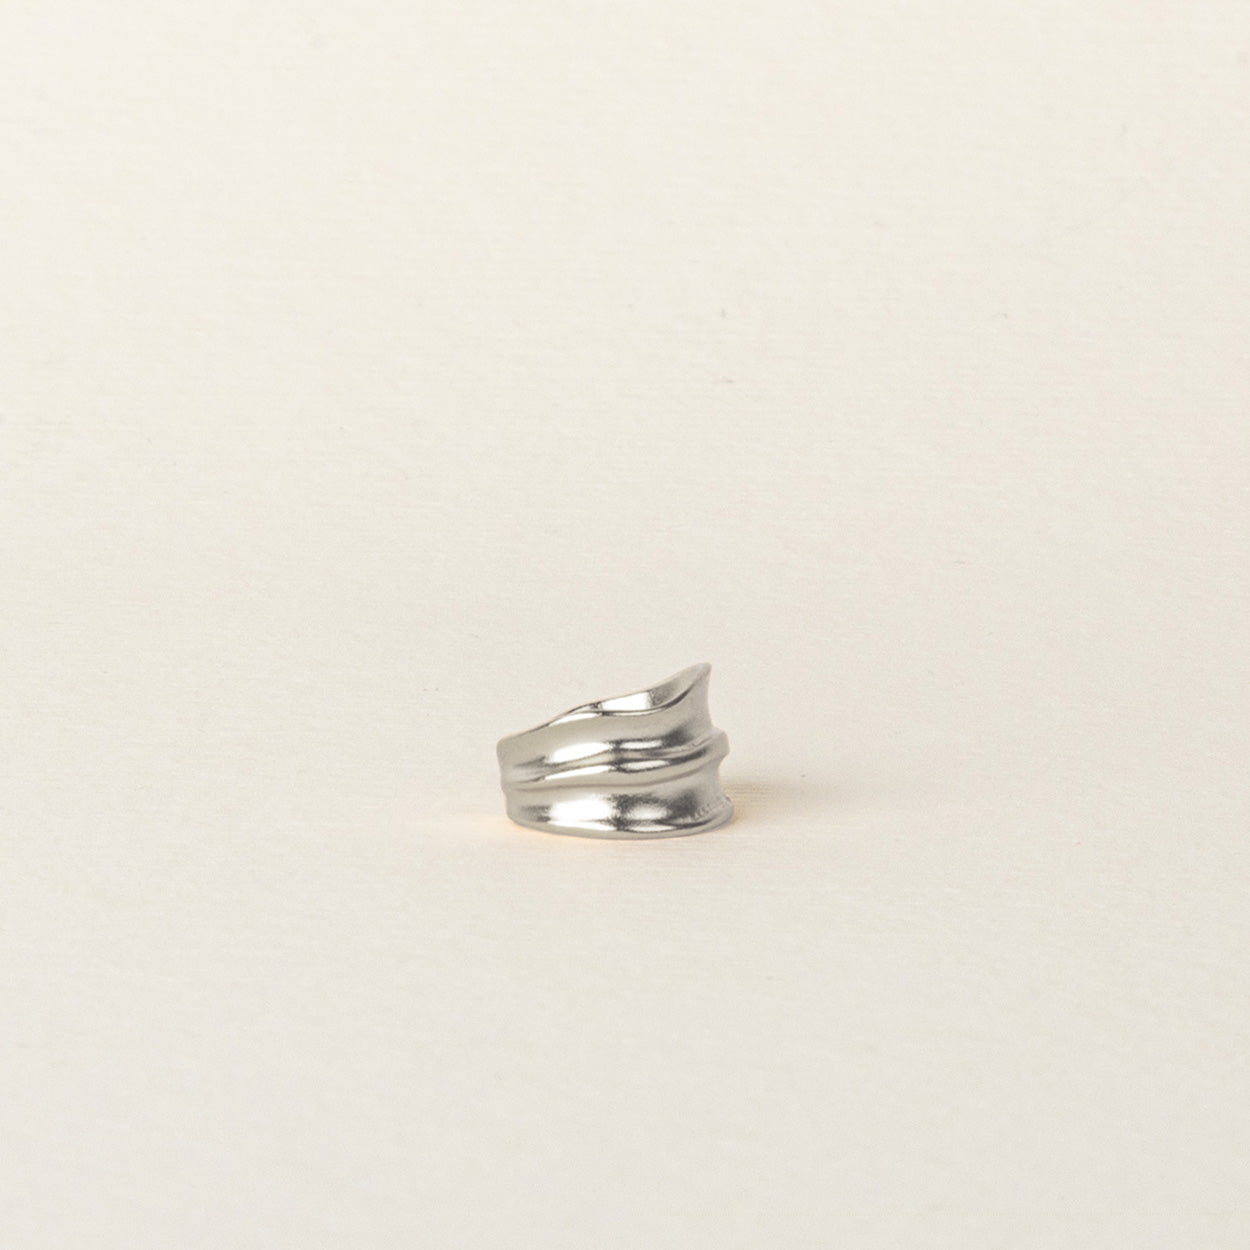 Image of the Mona Ear Cuff in Silver is designed for all ear types, providing a comfortable, medium secure hold for up to 24 hours. It features the ability to adjust with gentle squeezing, crafted with 925 Sterling Silver in one piece.